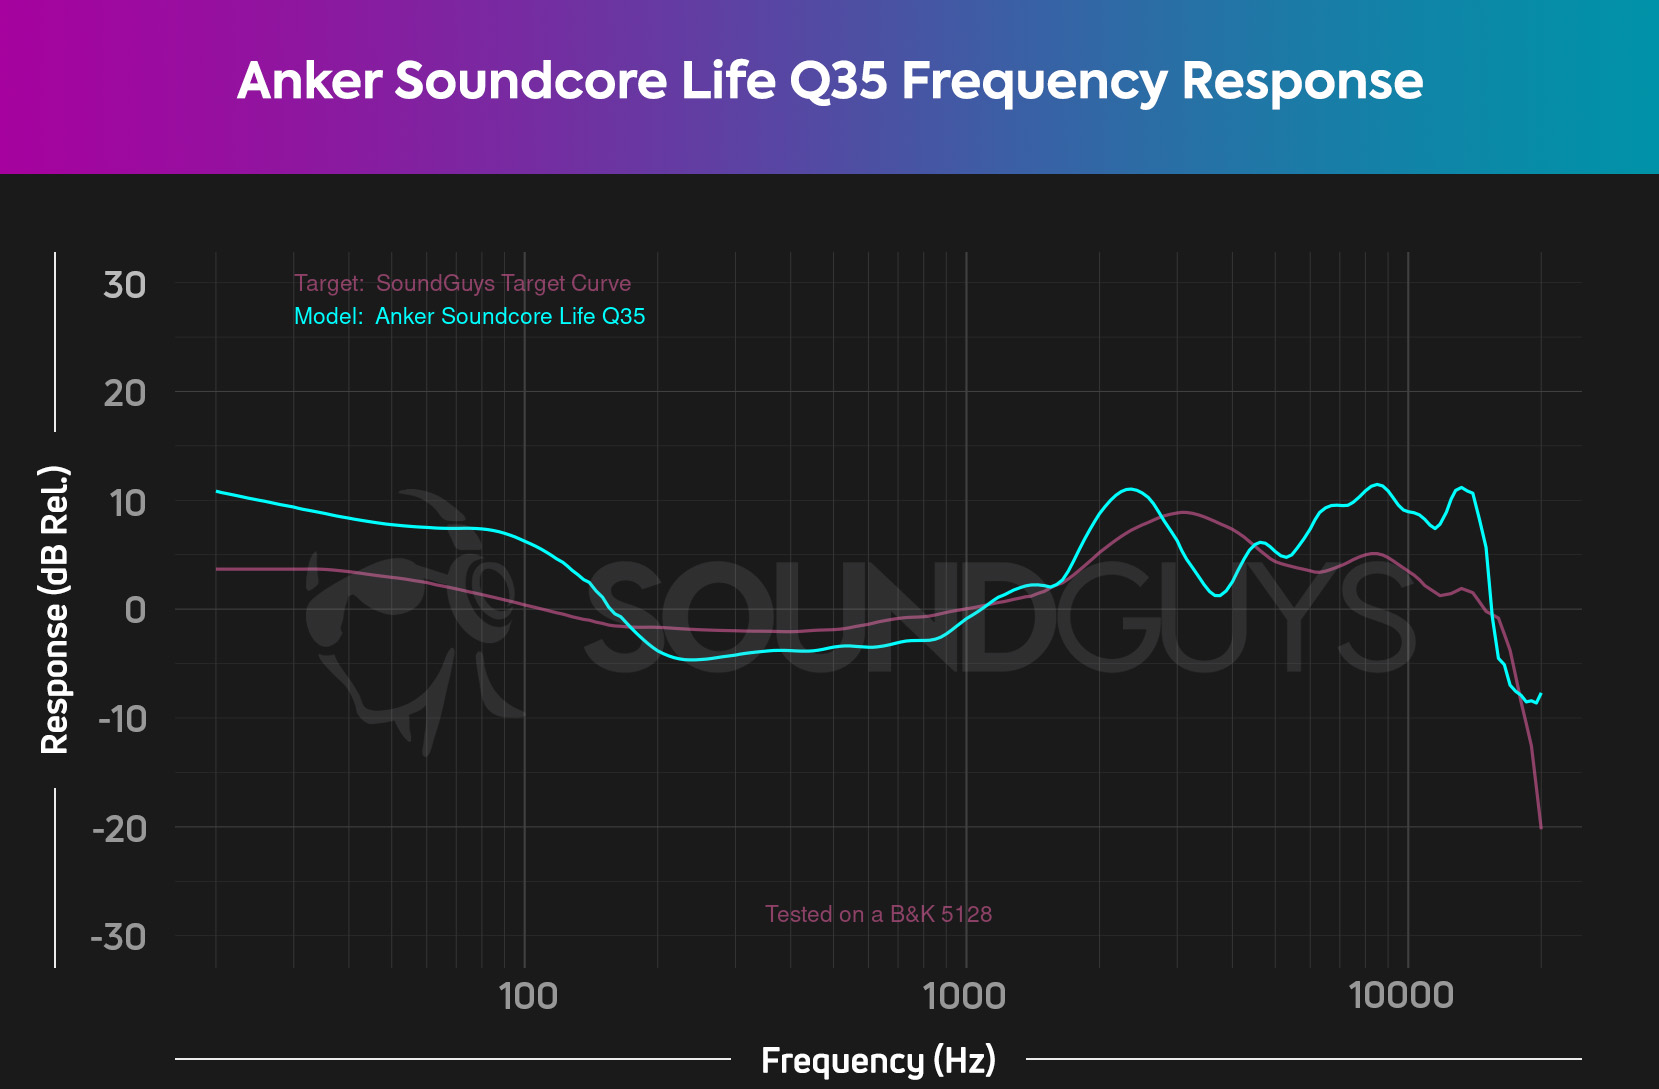 Chart depicting the Anker Soundcore Life Q35 frequency response relative to the SoundGuys Target Curve